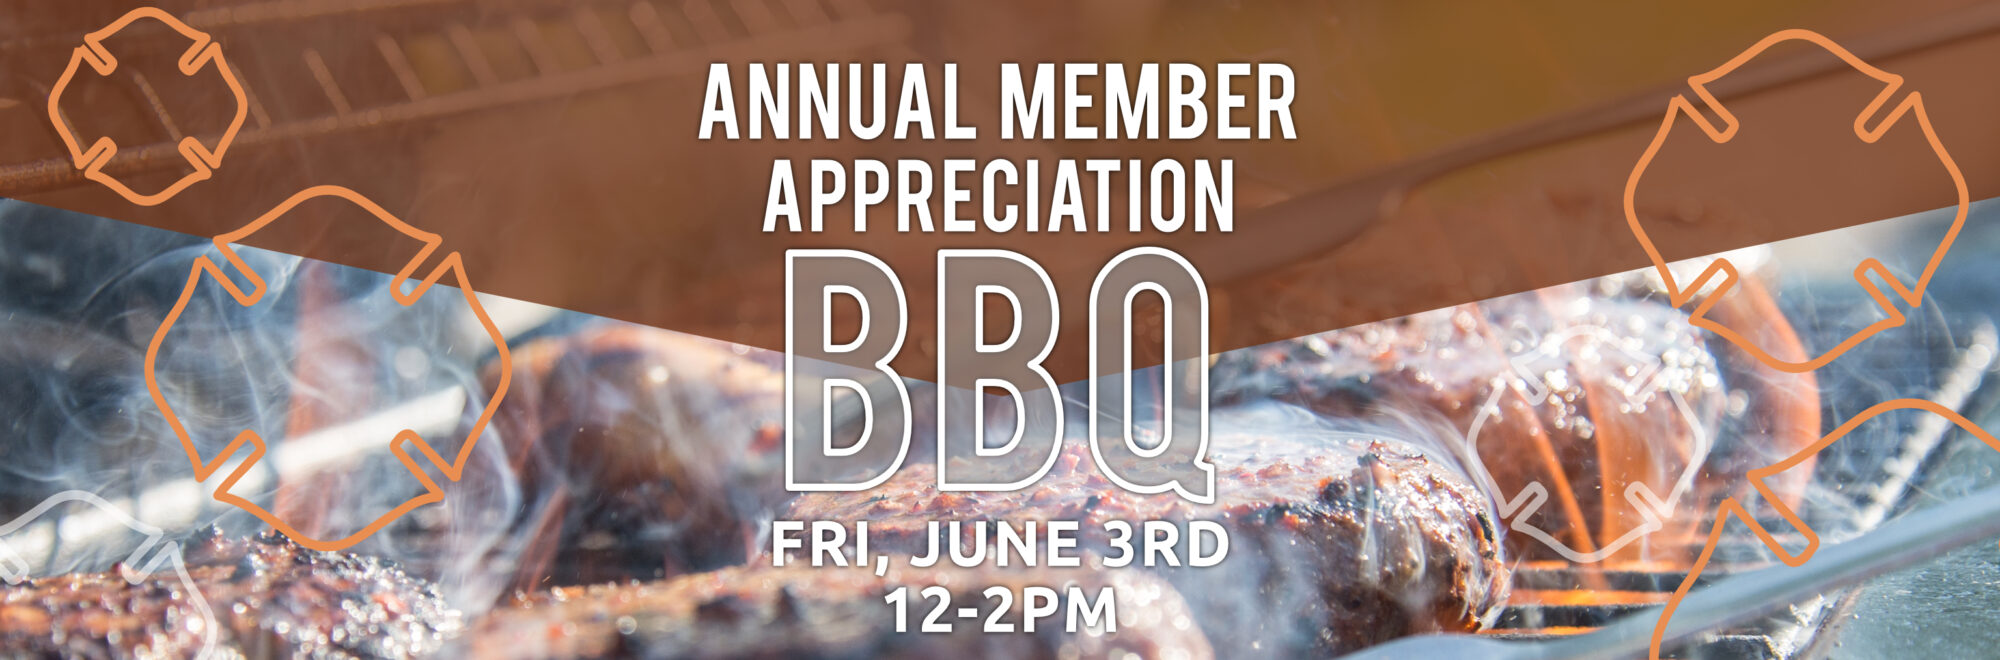 BBQ and Shred Day 6/3 at the Credit Union